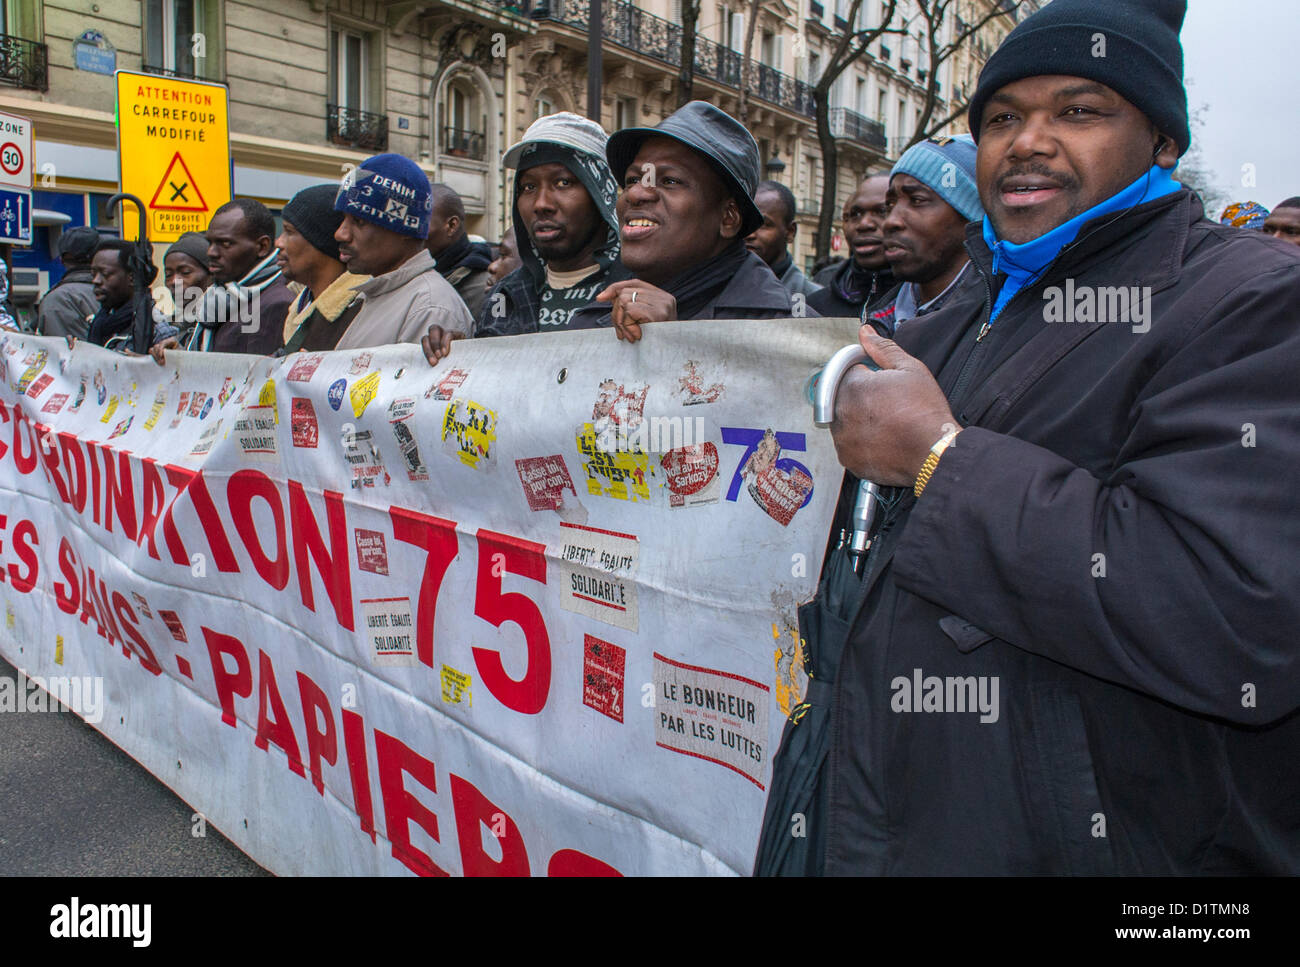 Paris, France, Aliens Without Papers Protesting French Government, African Immigrants Marching with Banners, activist protest, europe migrants, immigrant labor, black community Paris, immigrant worker france Europe Stock Photo